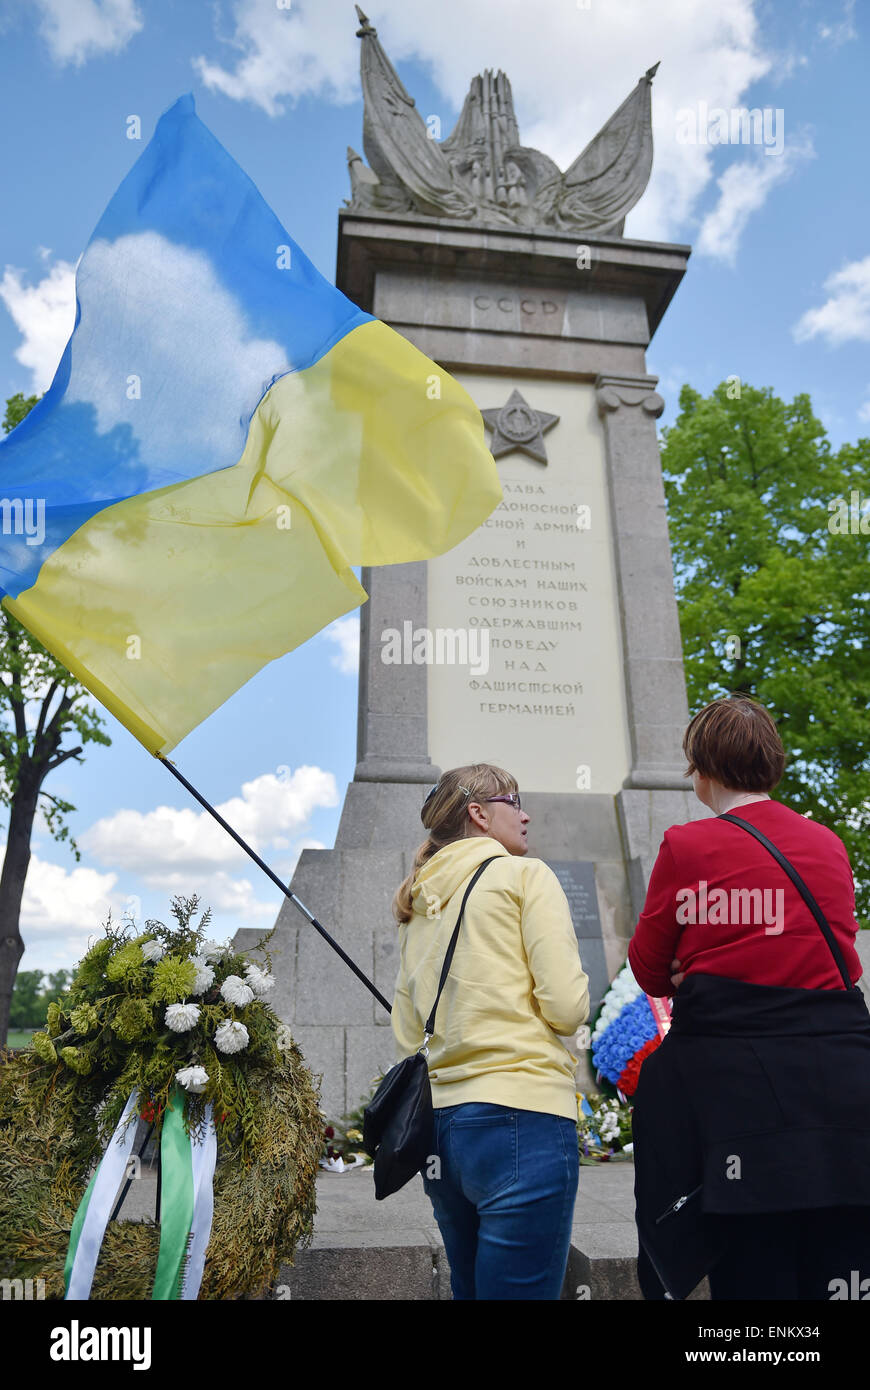 Torgau, Germany. 07th May, 2015. A Ukrainian woman speaks to another woman in front of a Soviet memorial site carrying a Ukrainian flag in Torgau, Germany, 07 May 2015. Members and sympathisers of the Russian motorcycle club 'Night wolves' are expected in Torgau on Thursday evening. The group is on a tour from Moscow to Berlin. They want to arrive in the German capital on 09 May 2015 - when Russia observes the day of victory over Hitler's Germany. Photo: HENDRIK SCHMIDT/dpa/Alamy Live News Stock Photo